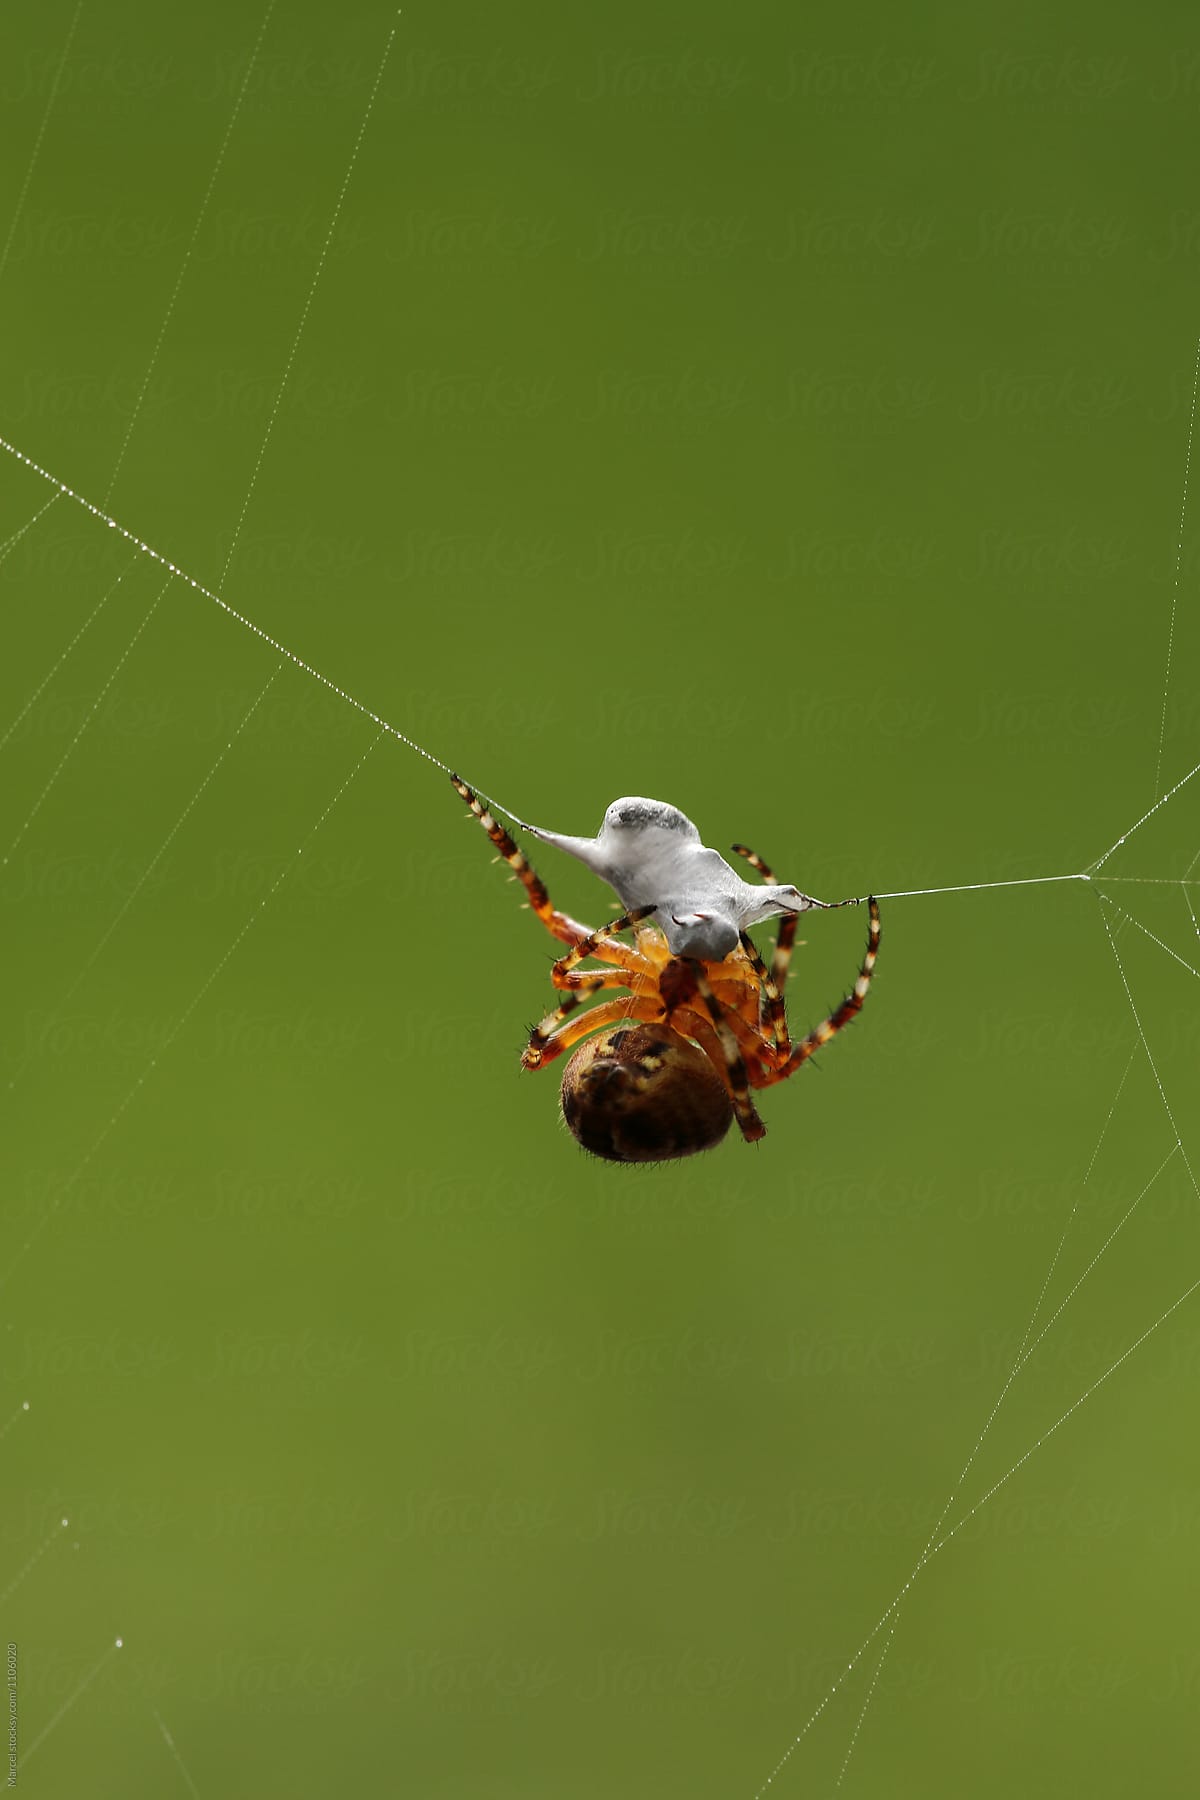 Spider wrapping up a prey